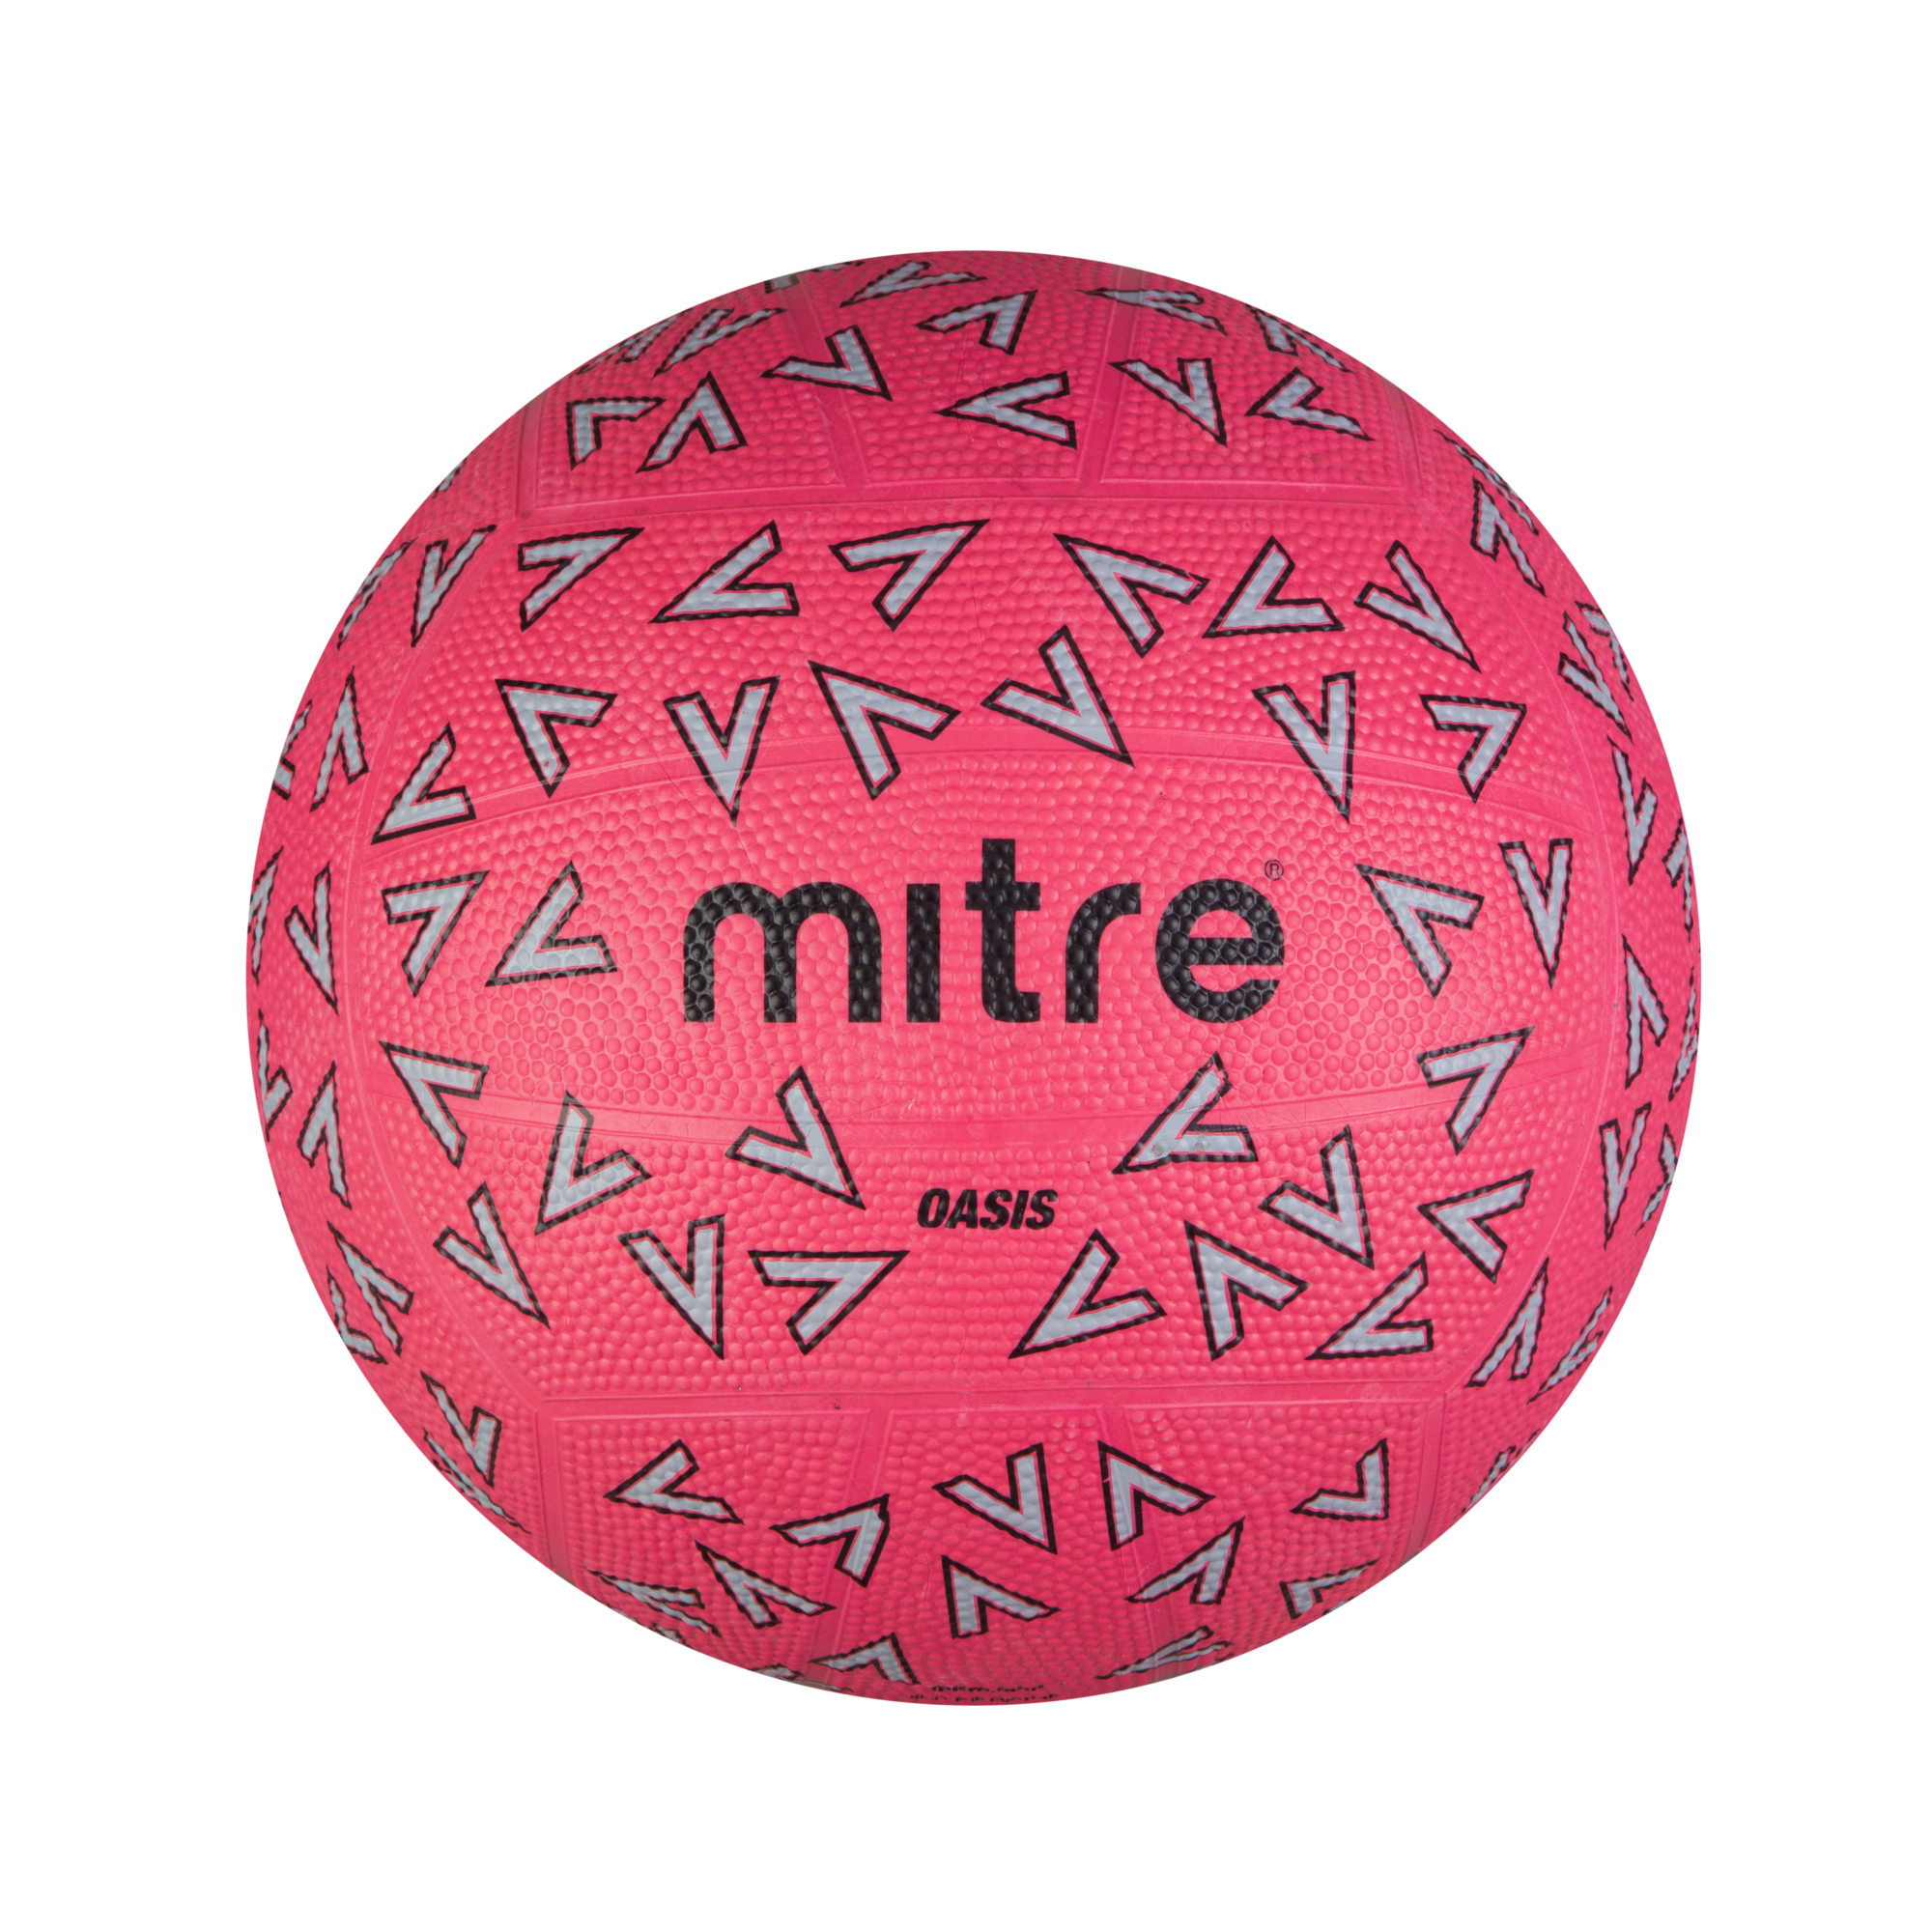 Mitre Oasis Netball Size5 Pink